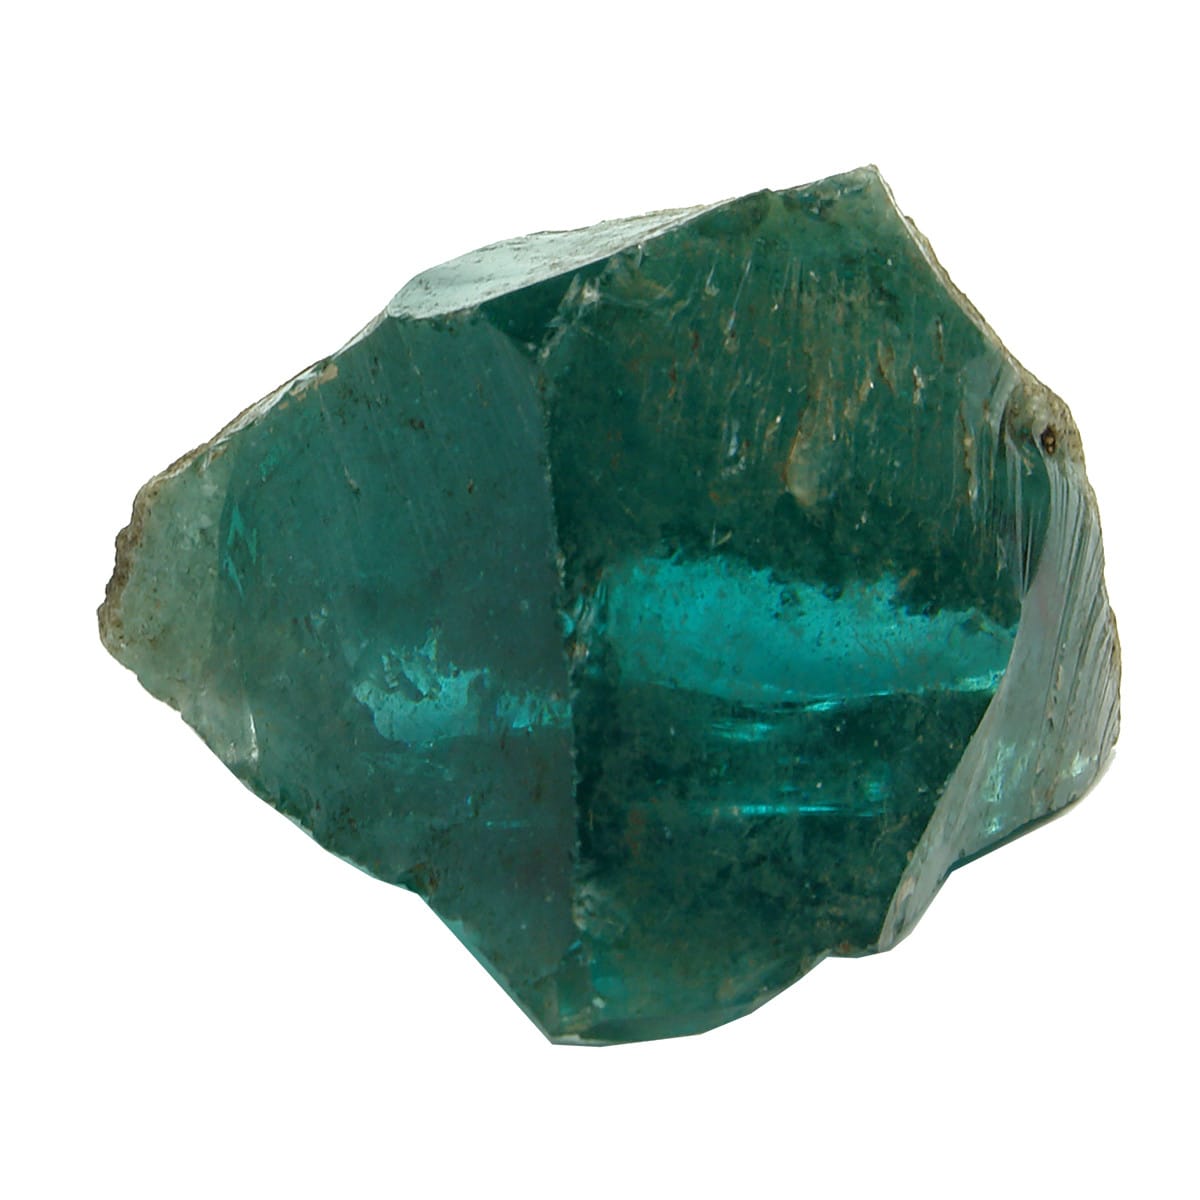 Piece of Glass Slag from Lake Tyers Glass Works. Pyramid shaped. (Victoria)